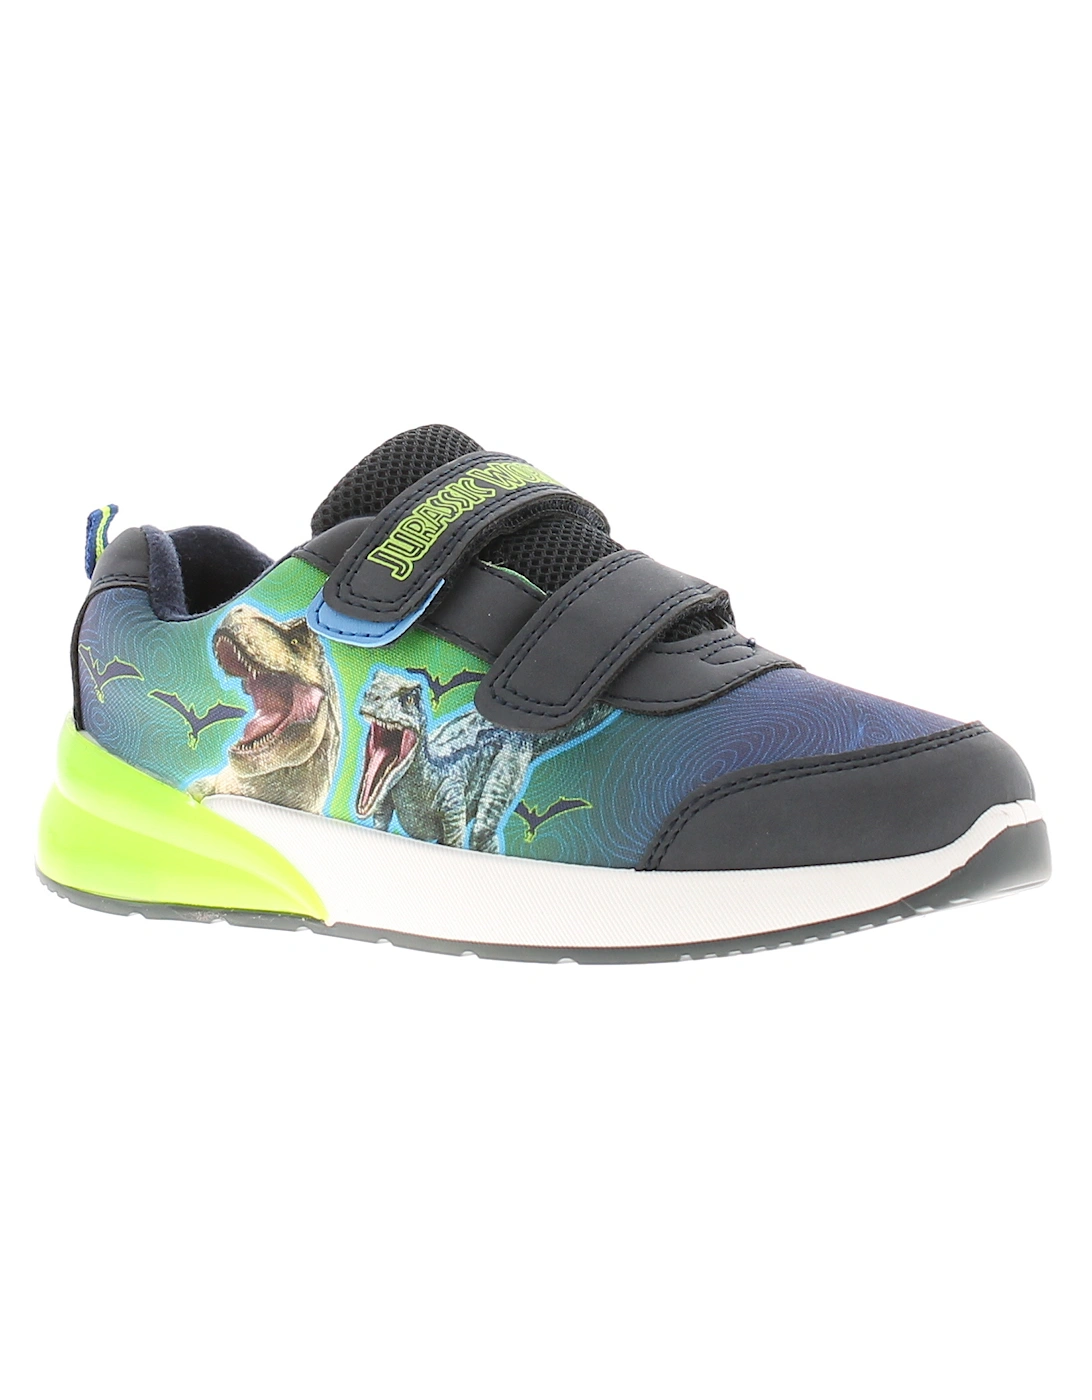 Boys Trainers Blake Younger Touch Fastening navy green UK Size, 6 of 5